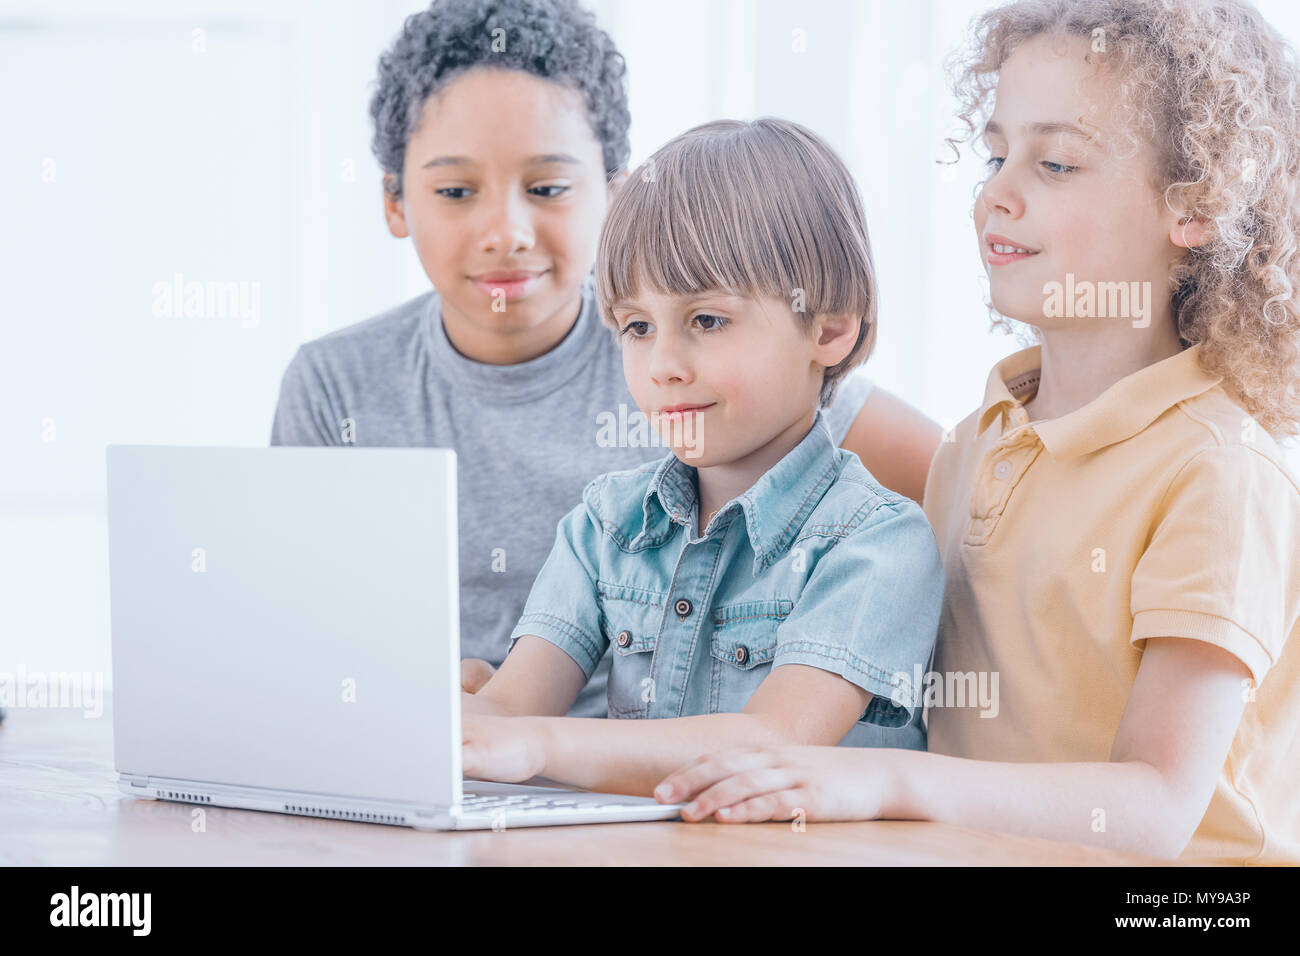 Young boy learns to program the robots during coding classes, children coding concept Stock Photo